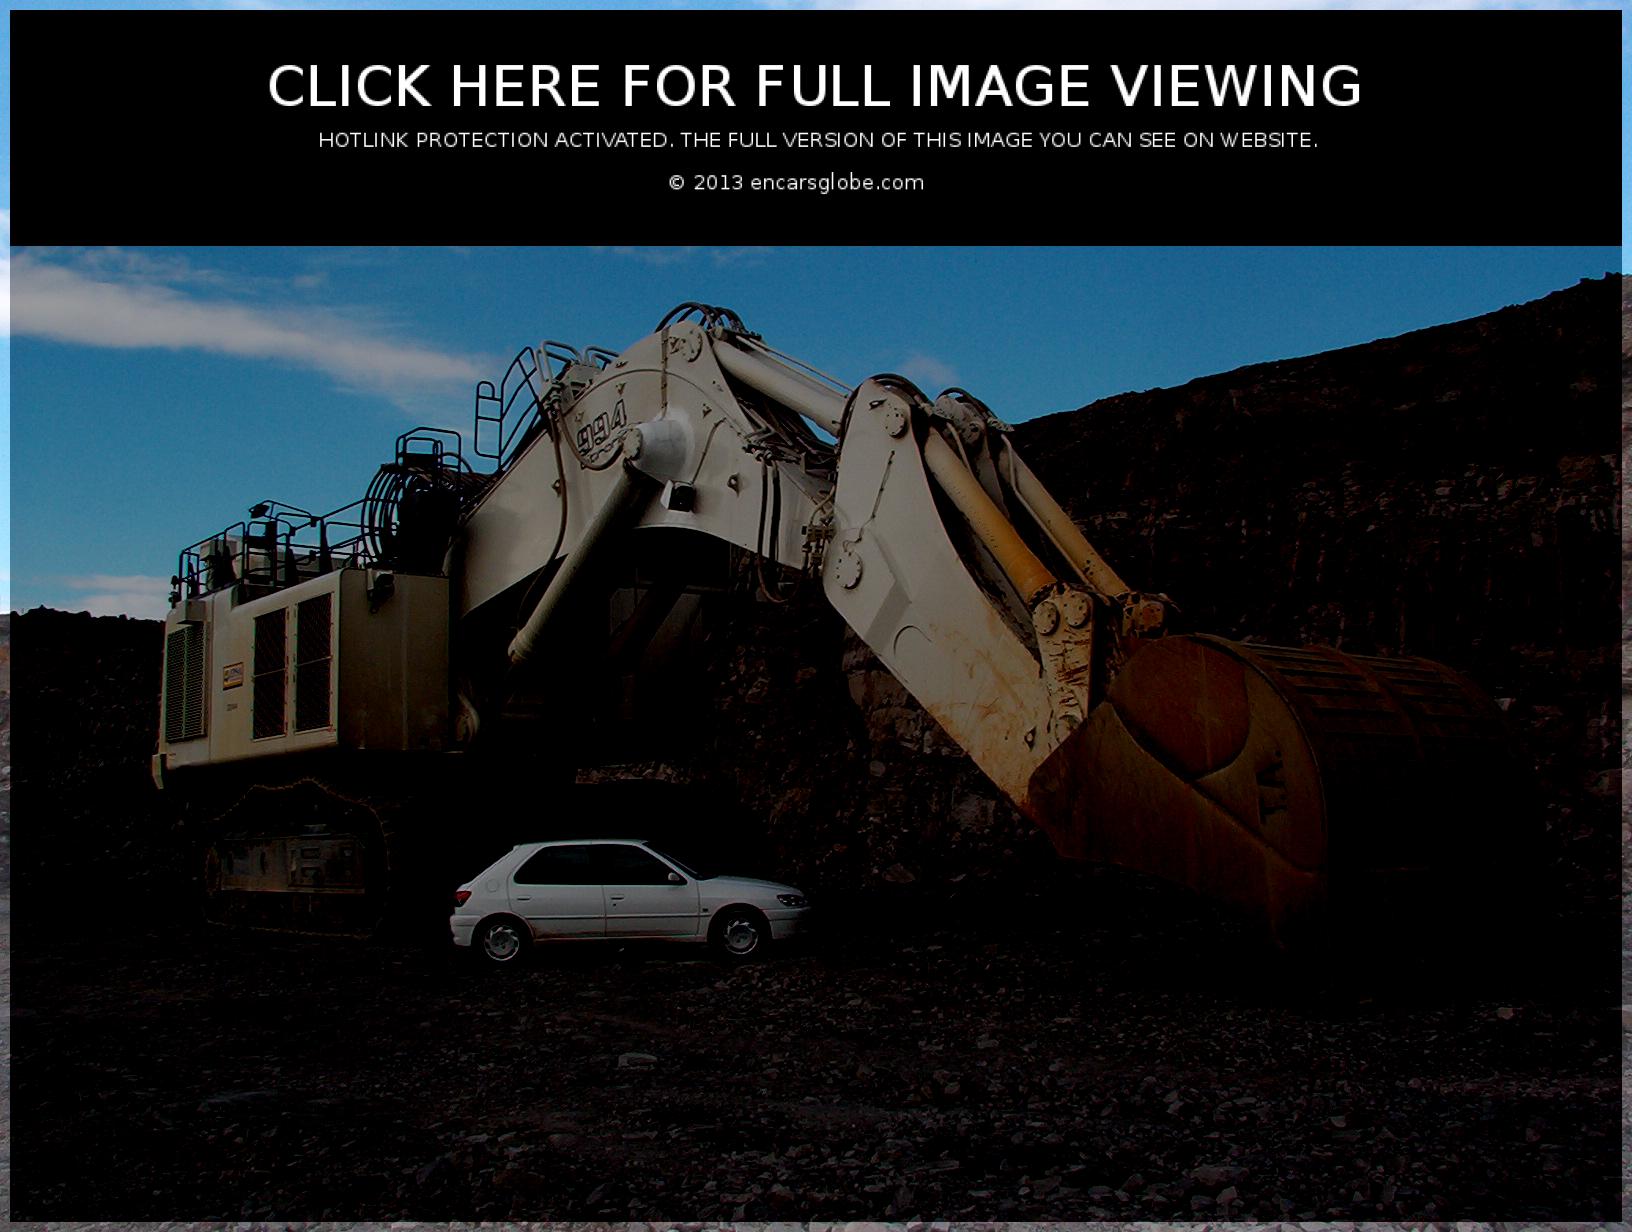 Liebherr LTM 1220-51 Photo Gallery: Photo #04 out of 8, Image Size ...